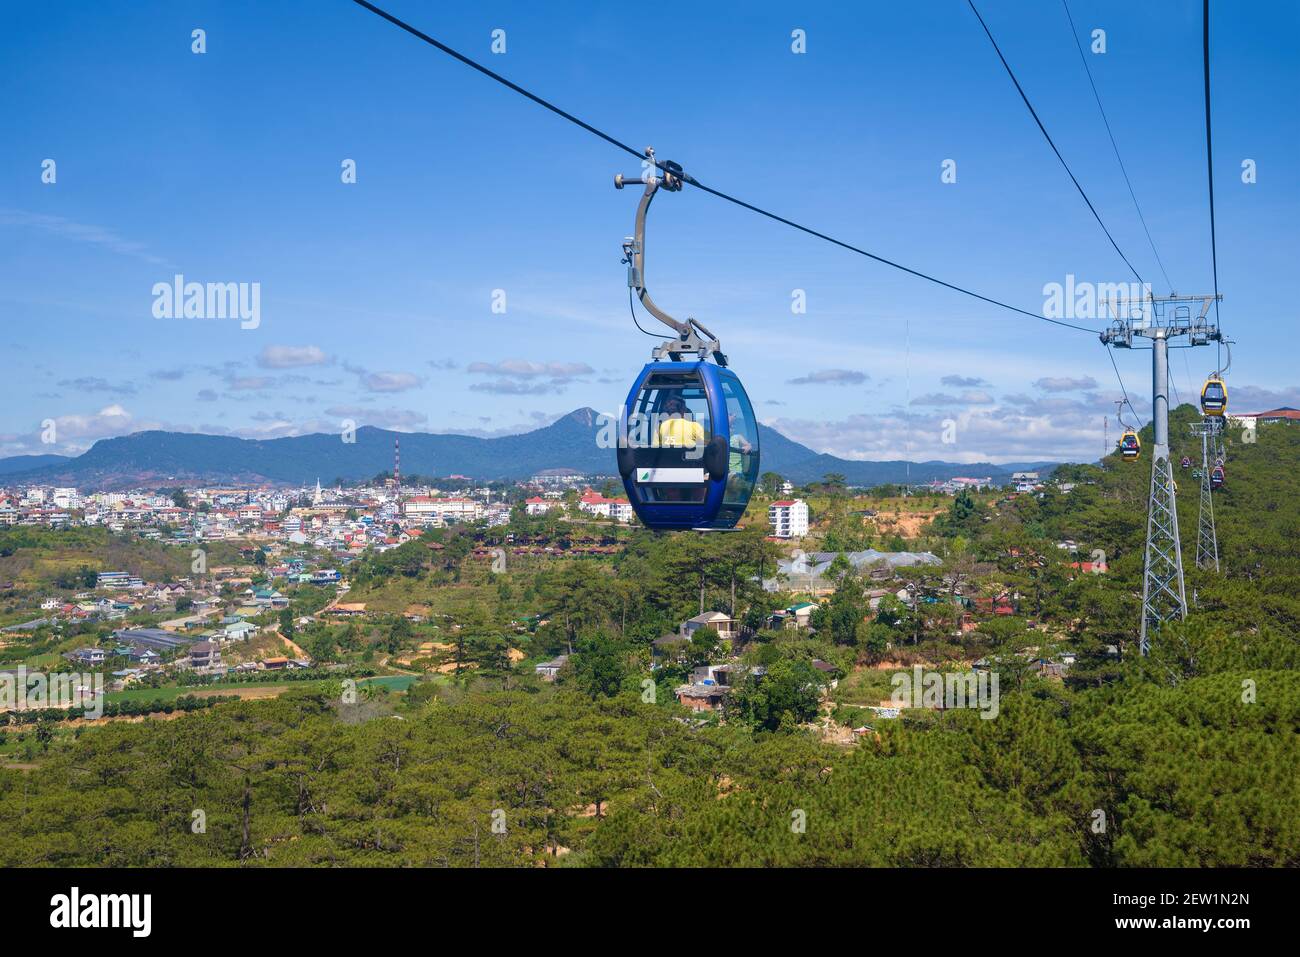 DA LAT, VIETNAM - DECEMBER 28, 2015: On the cable car of the city of Da Lat Stock Photo